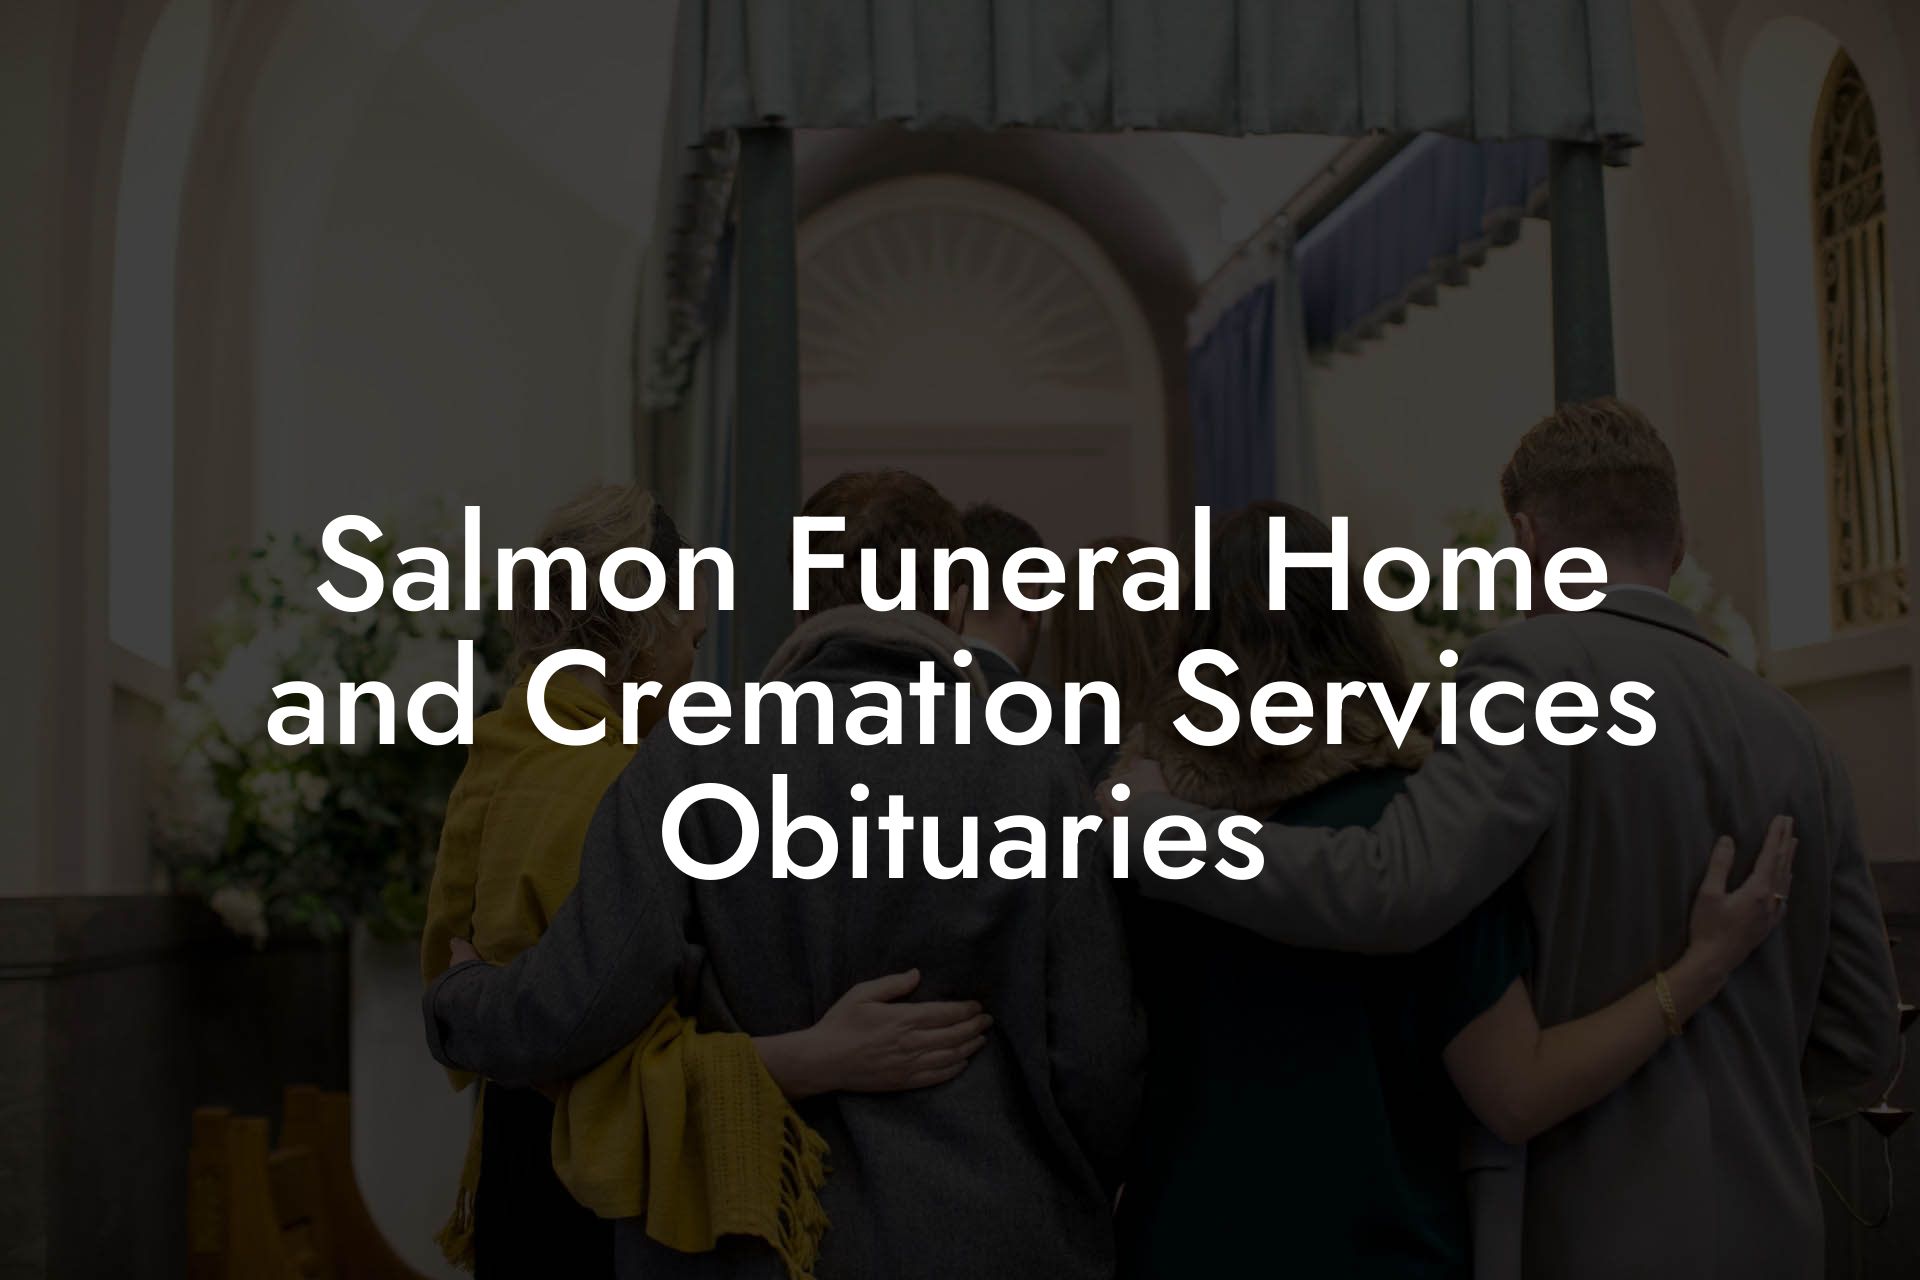 Salmon Funeral Home and Cremation Services Obituaries